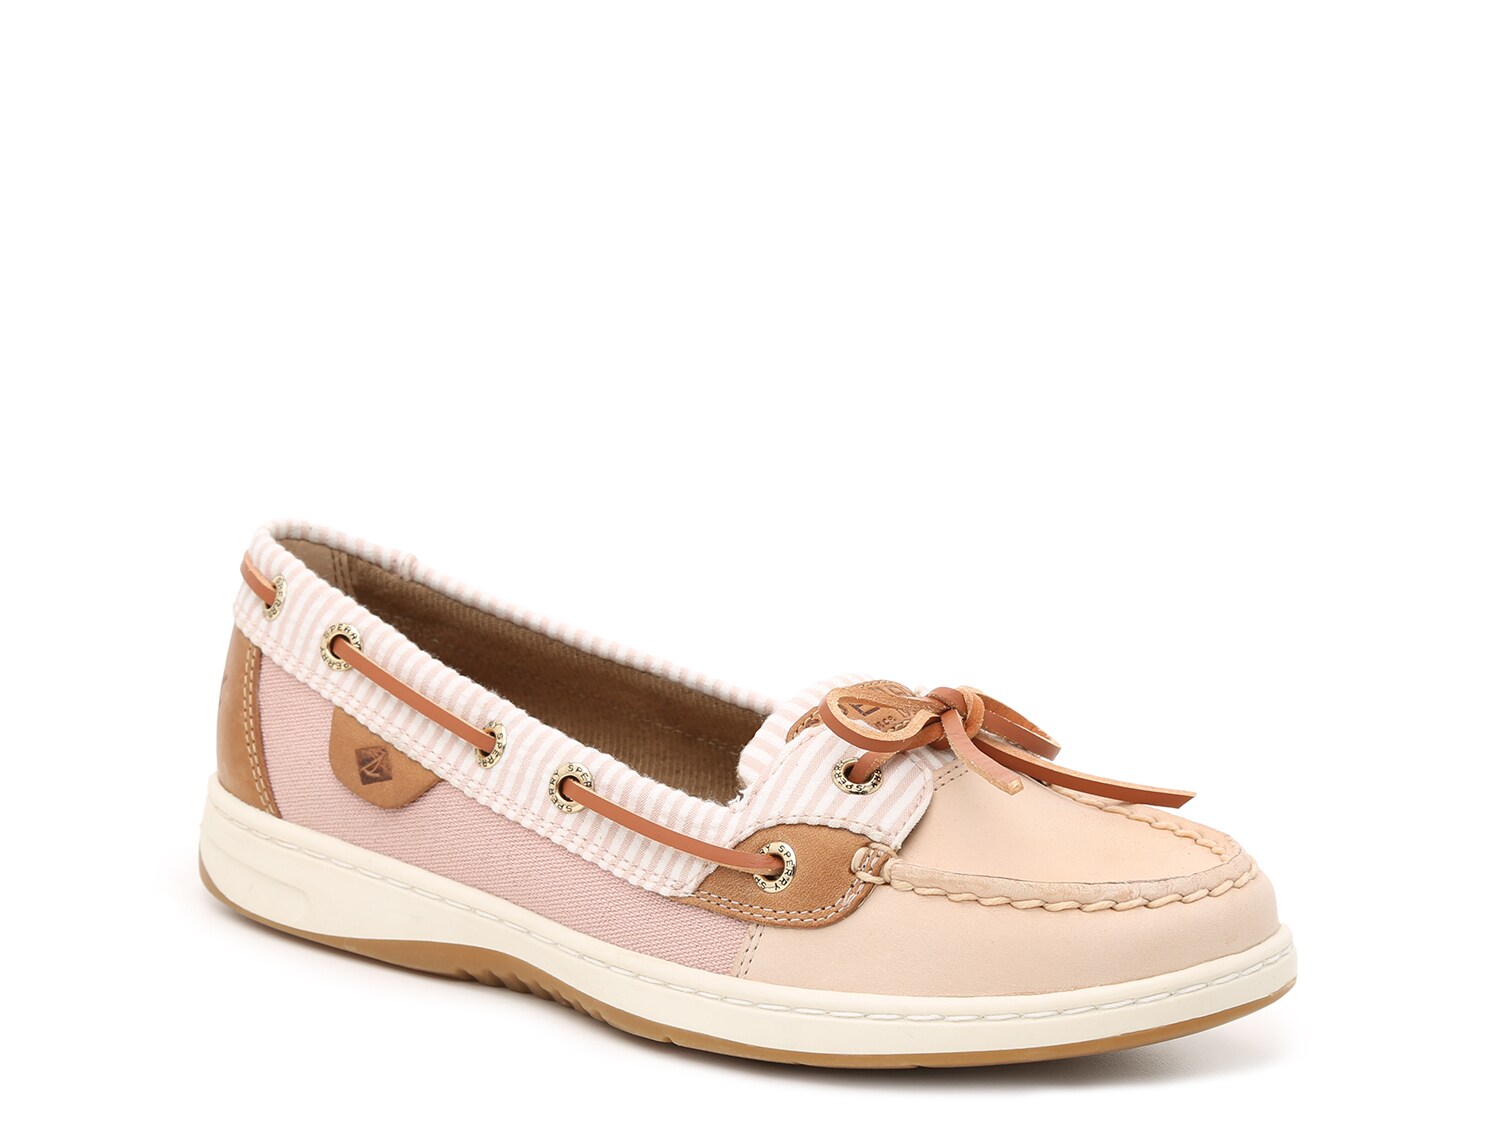 sperry angelfish shoes sale